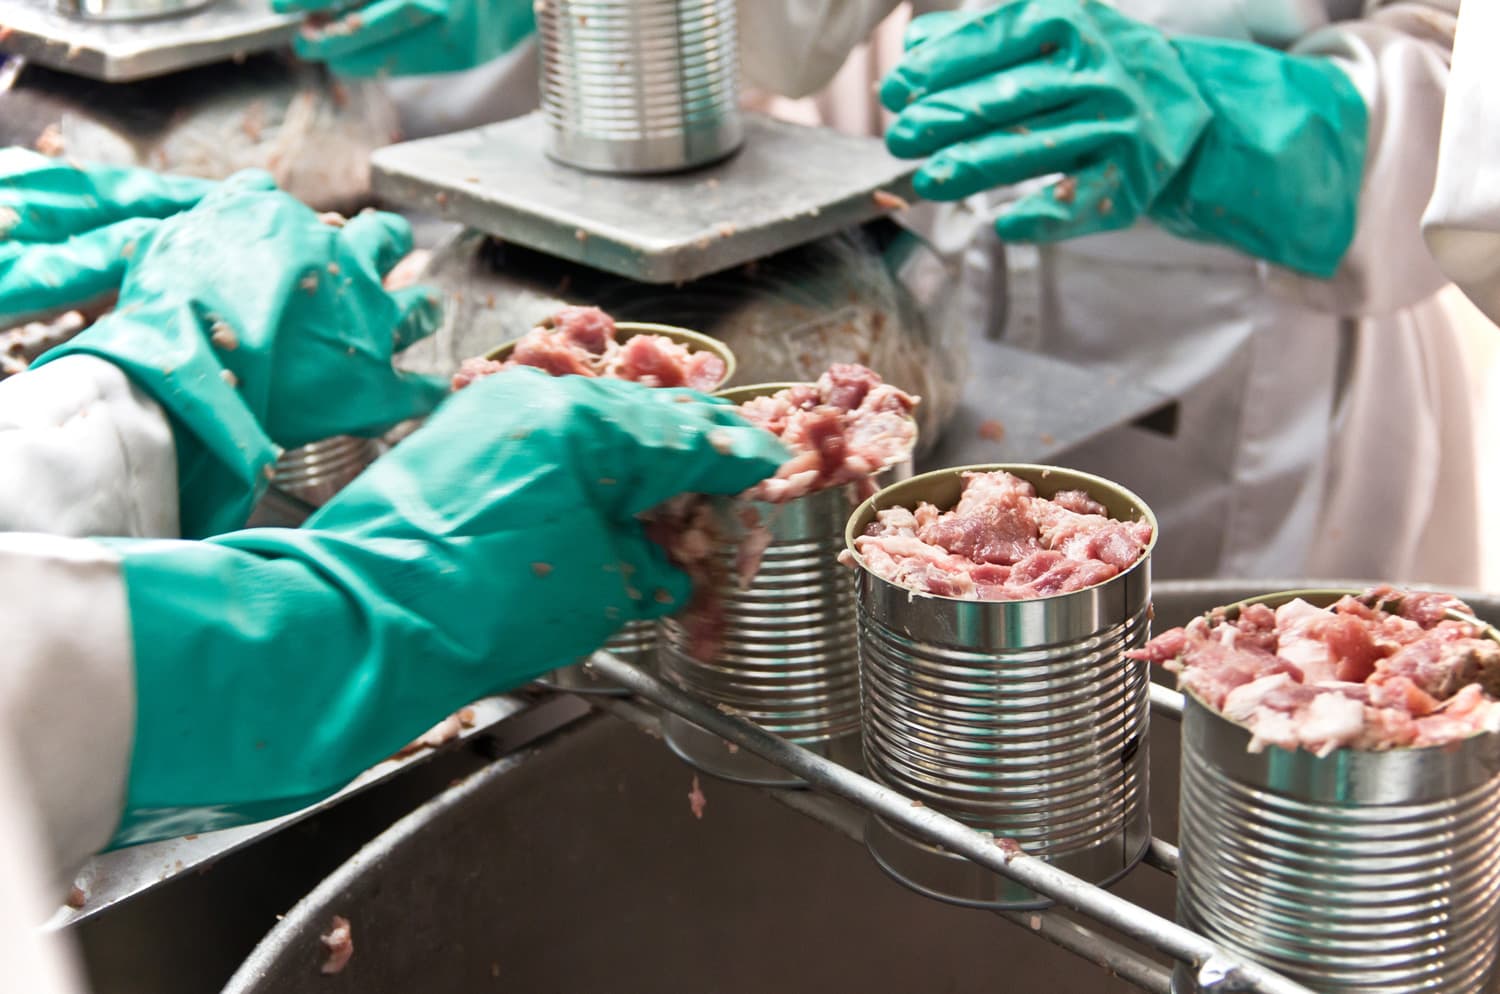 Pork is prepared for canning on a manual food production line.